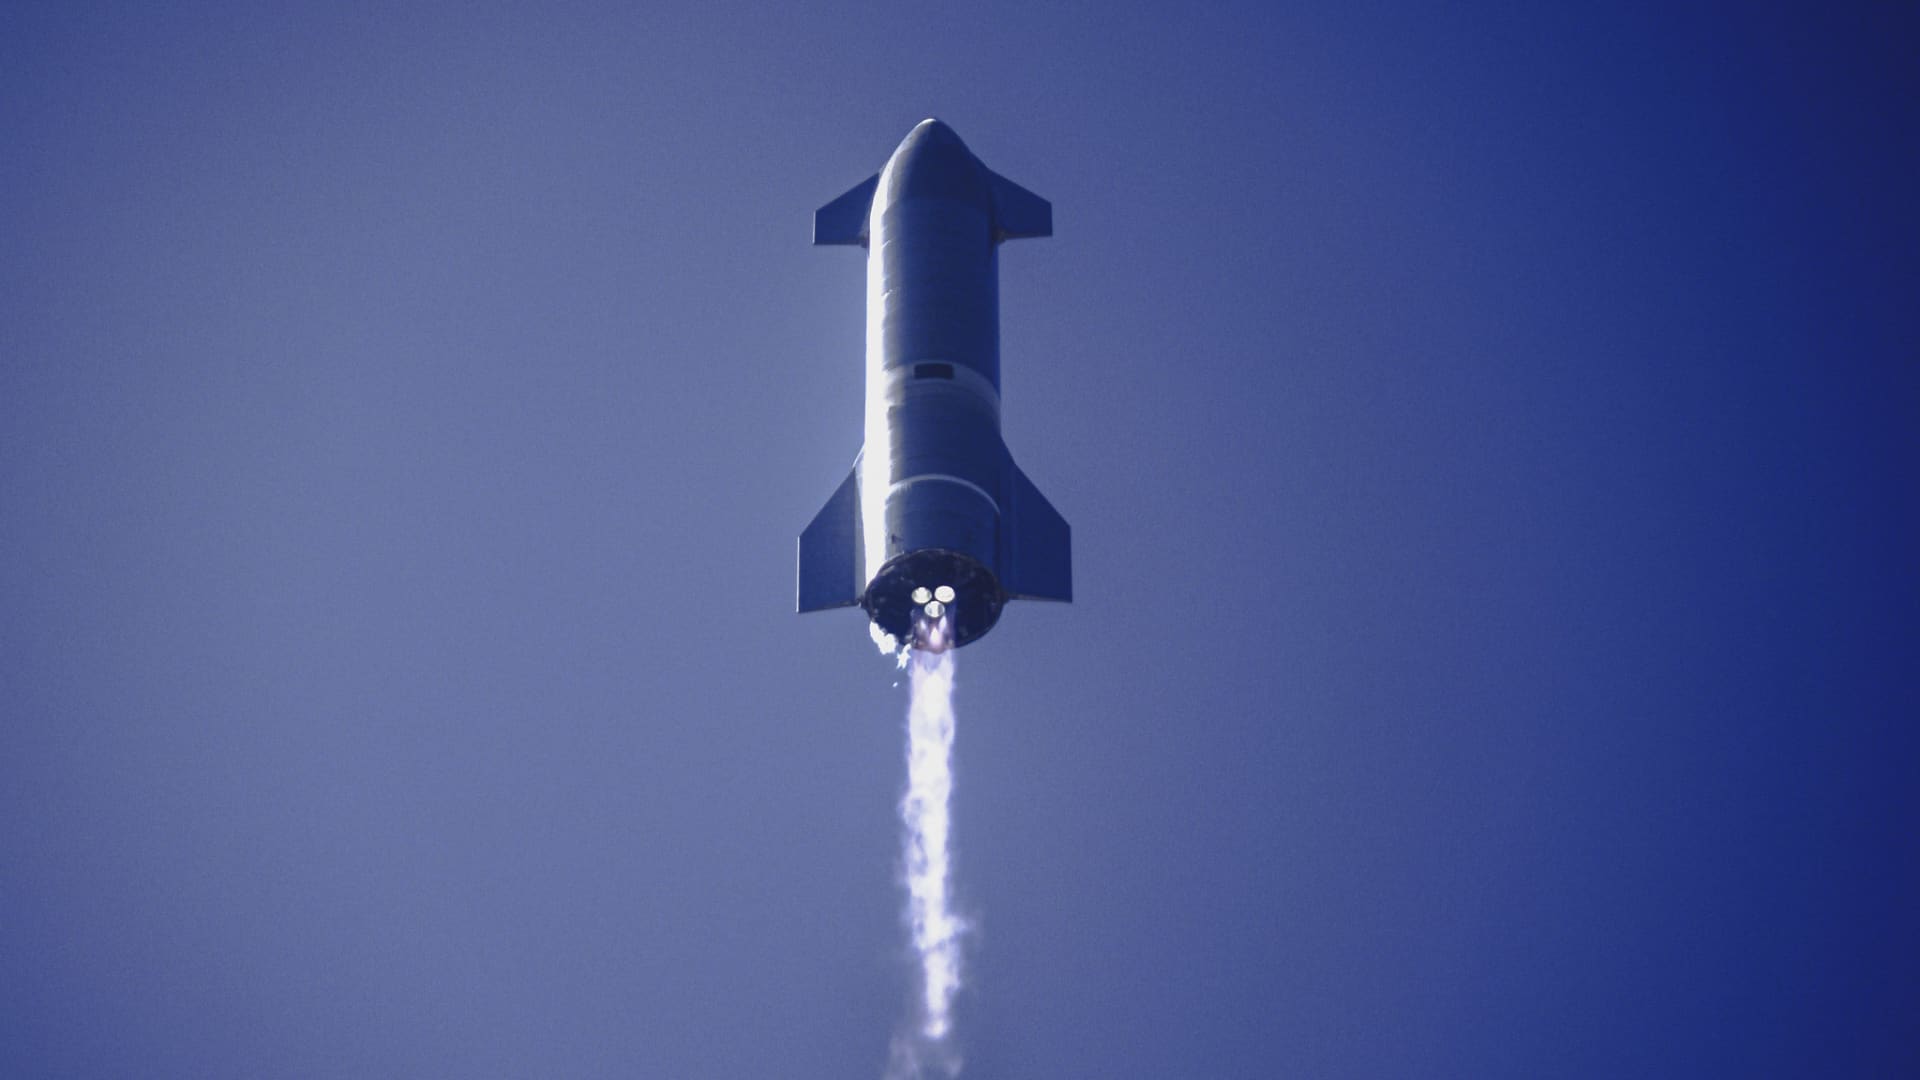 Starship prototype SN9 launches from the company's development facility in Boca Chica, Texas.